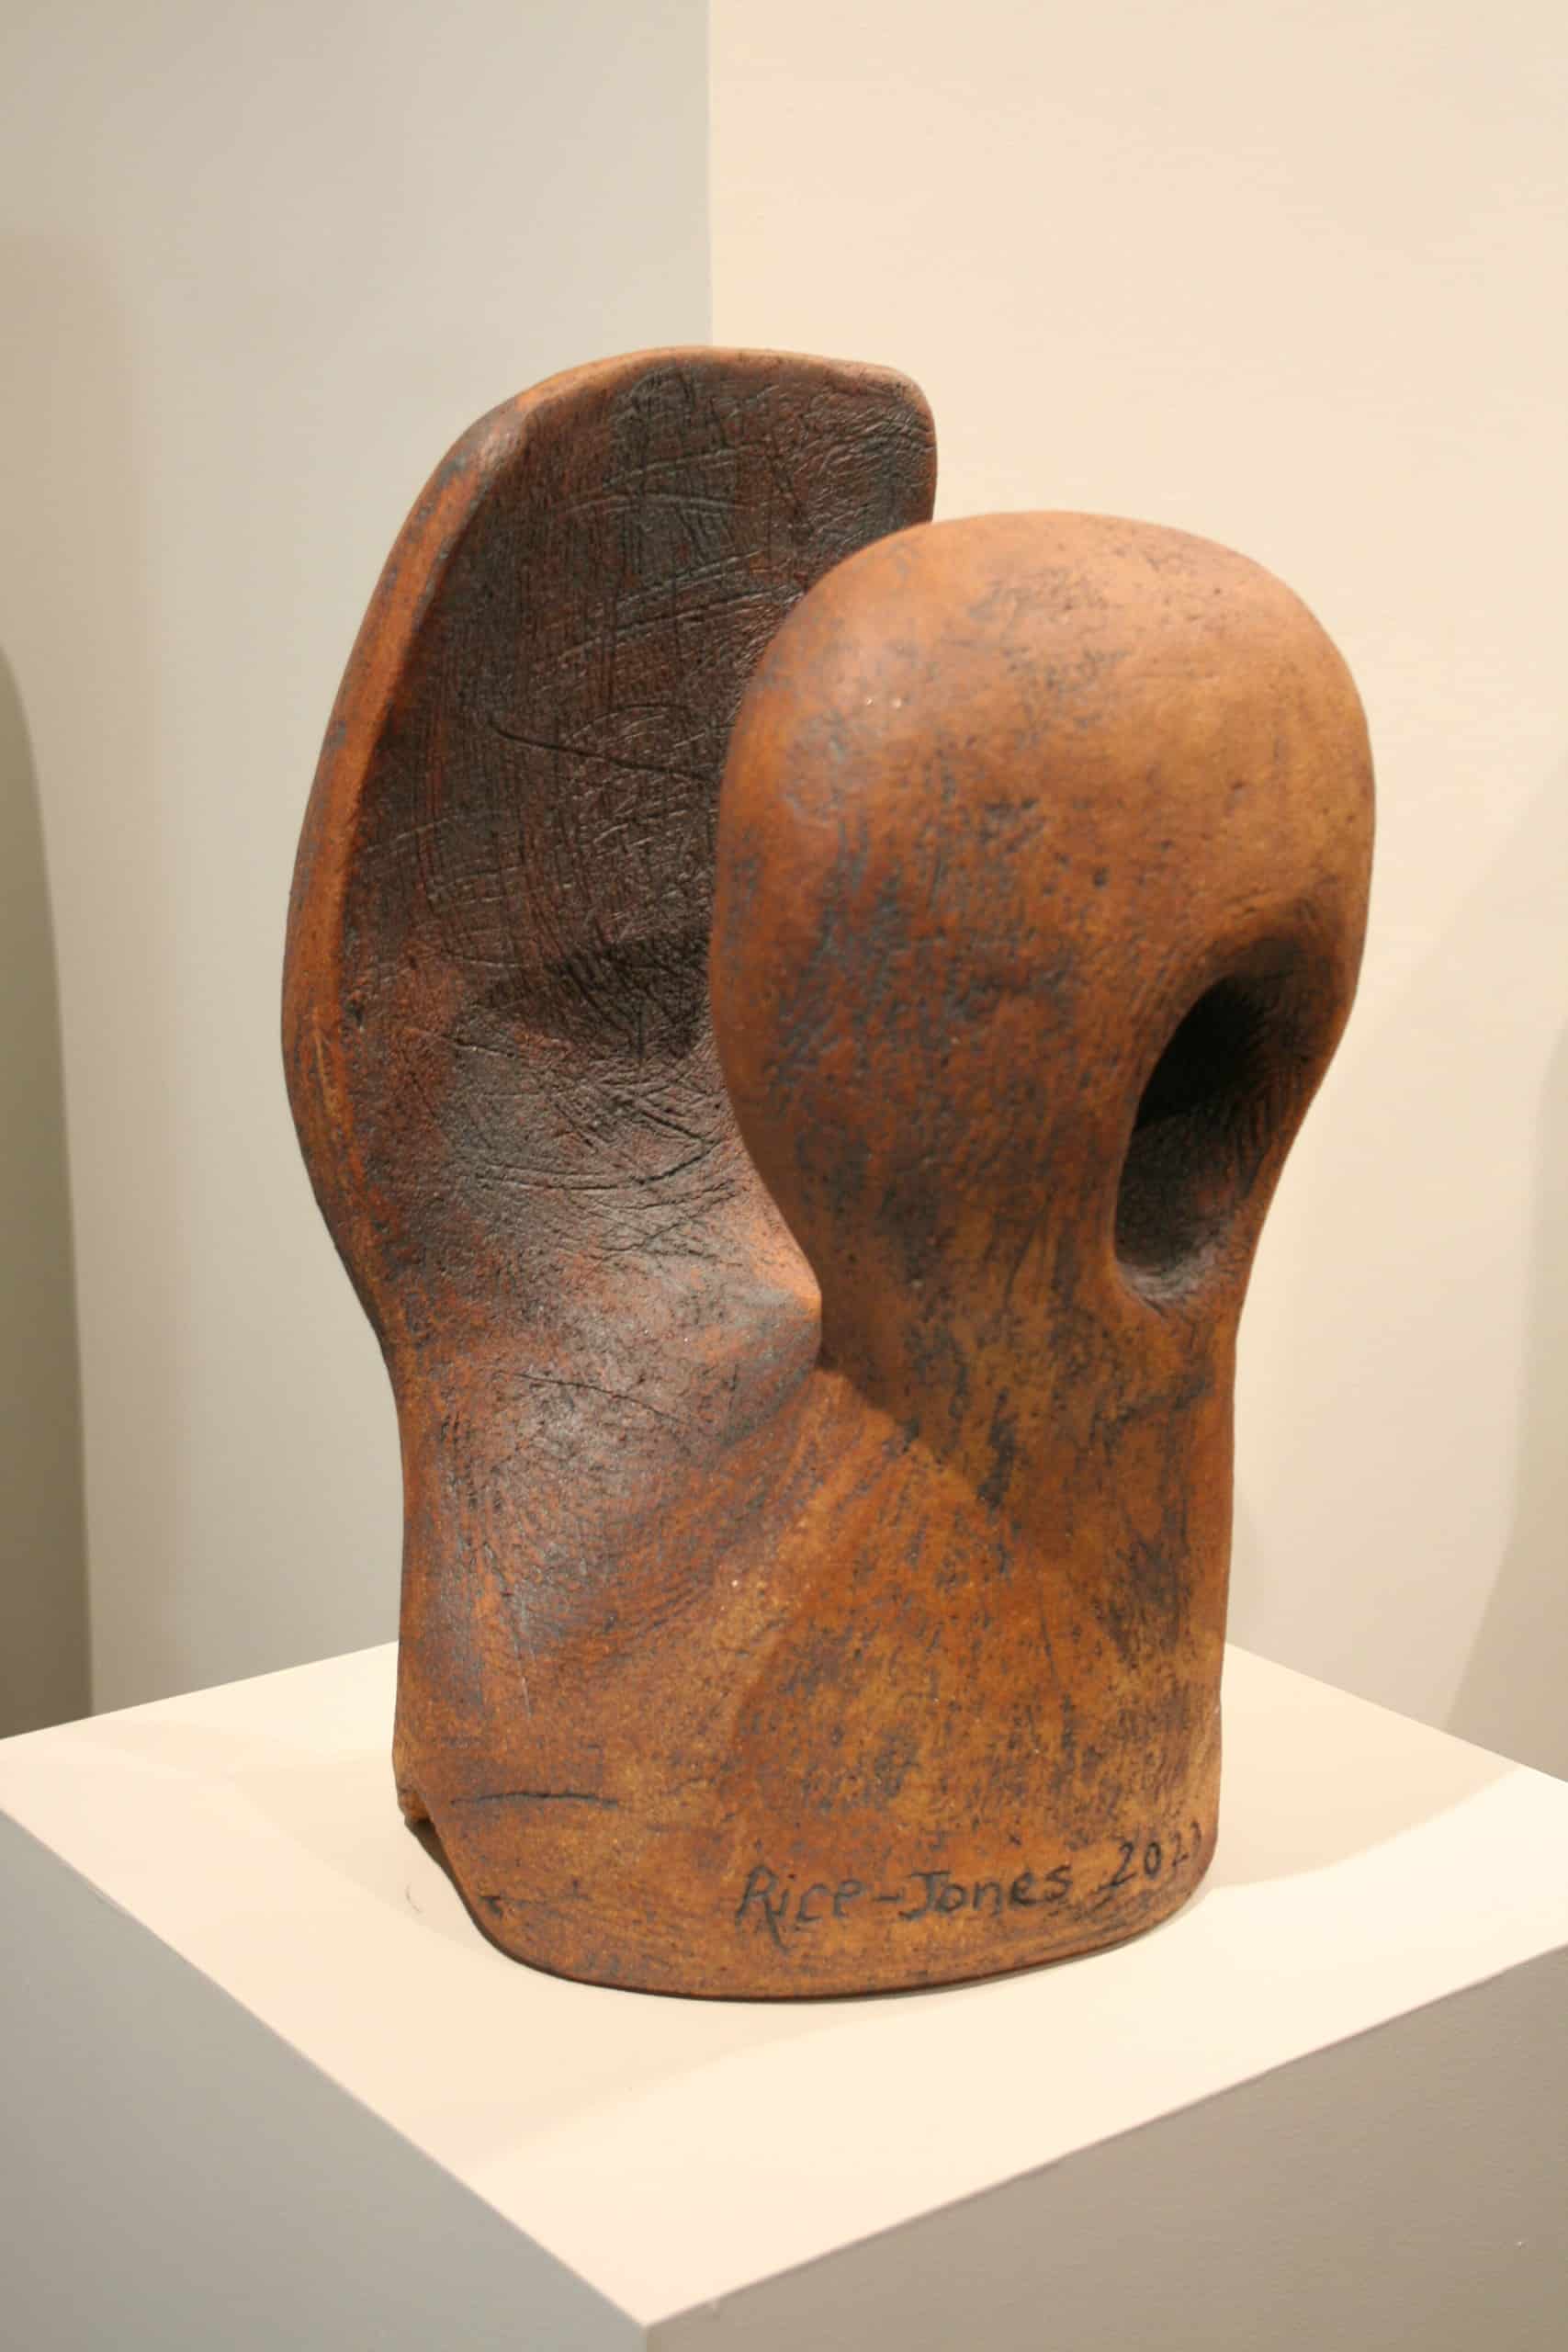 Image of Contemporary art piece titled Listening Post by Keith Rice-Jones  